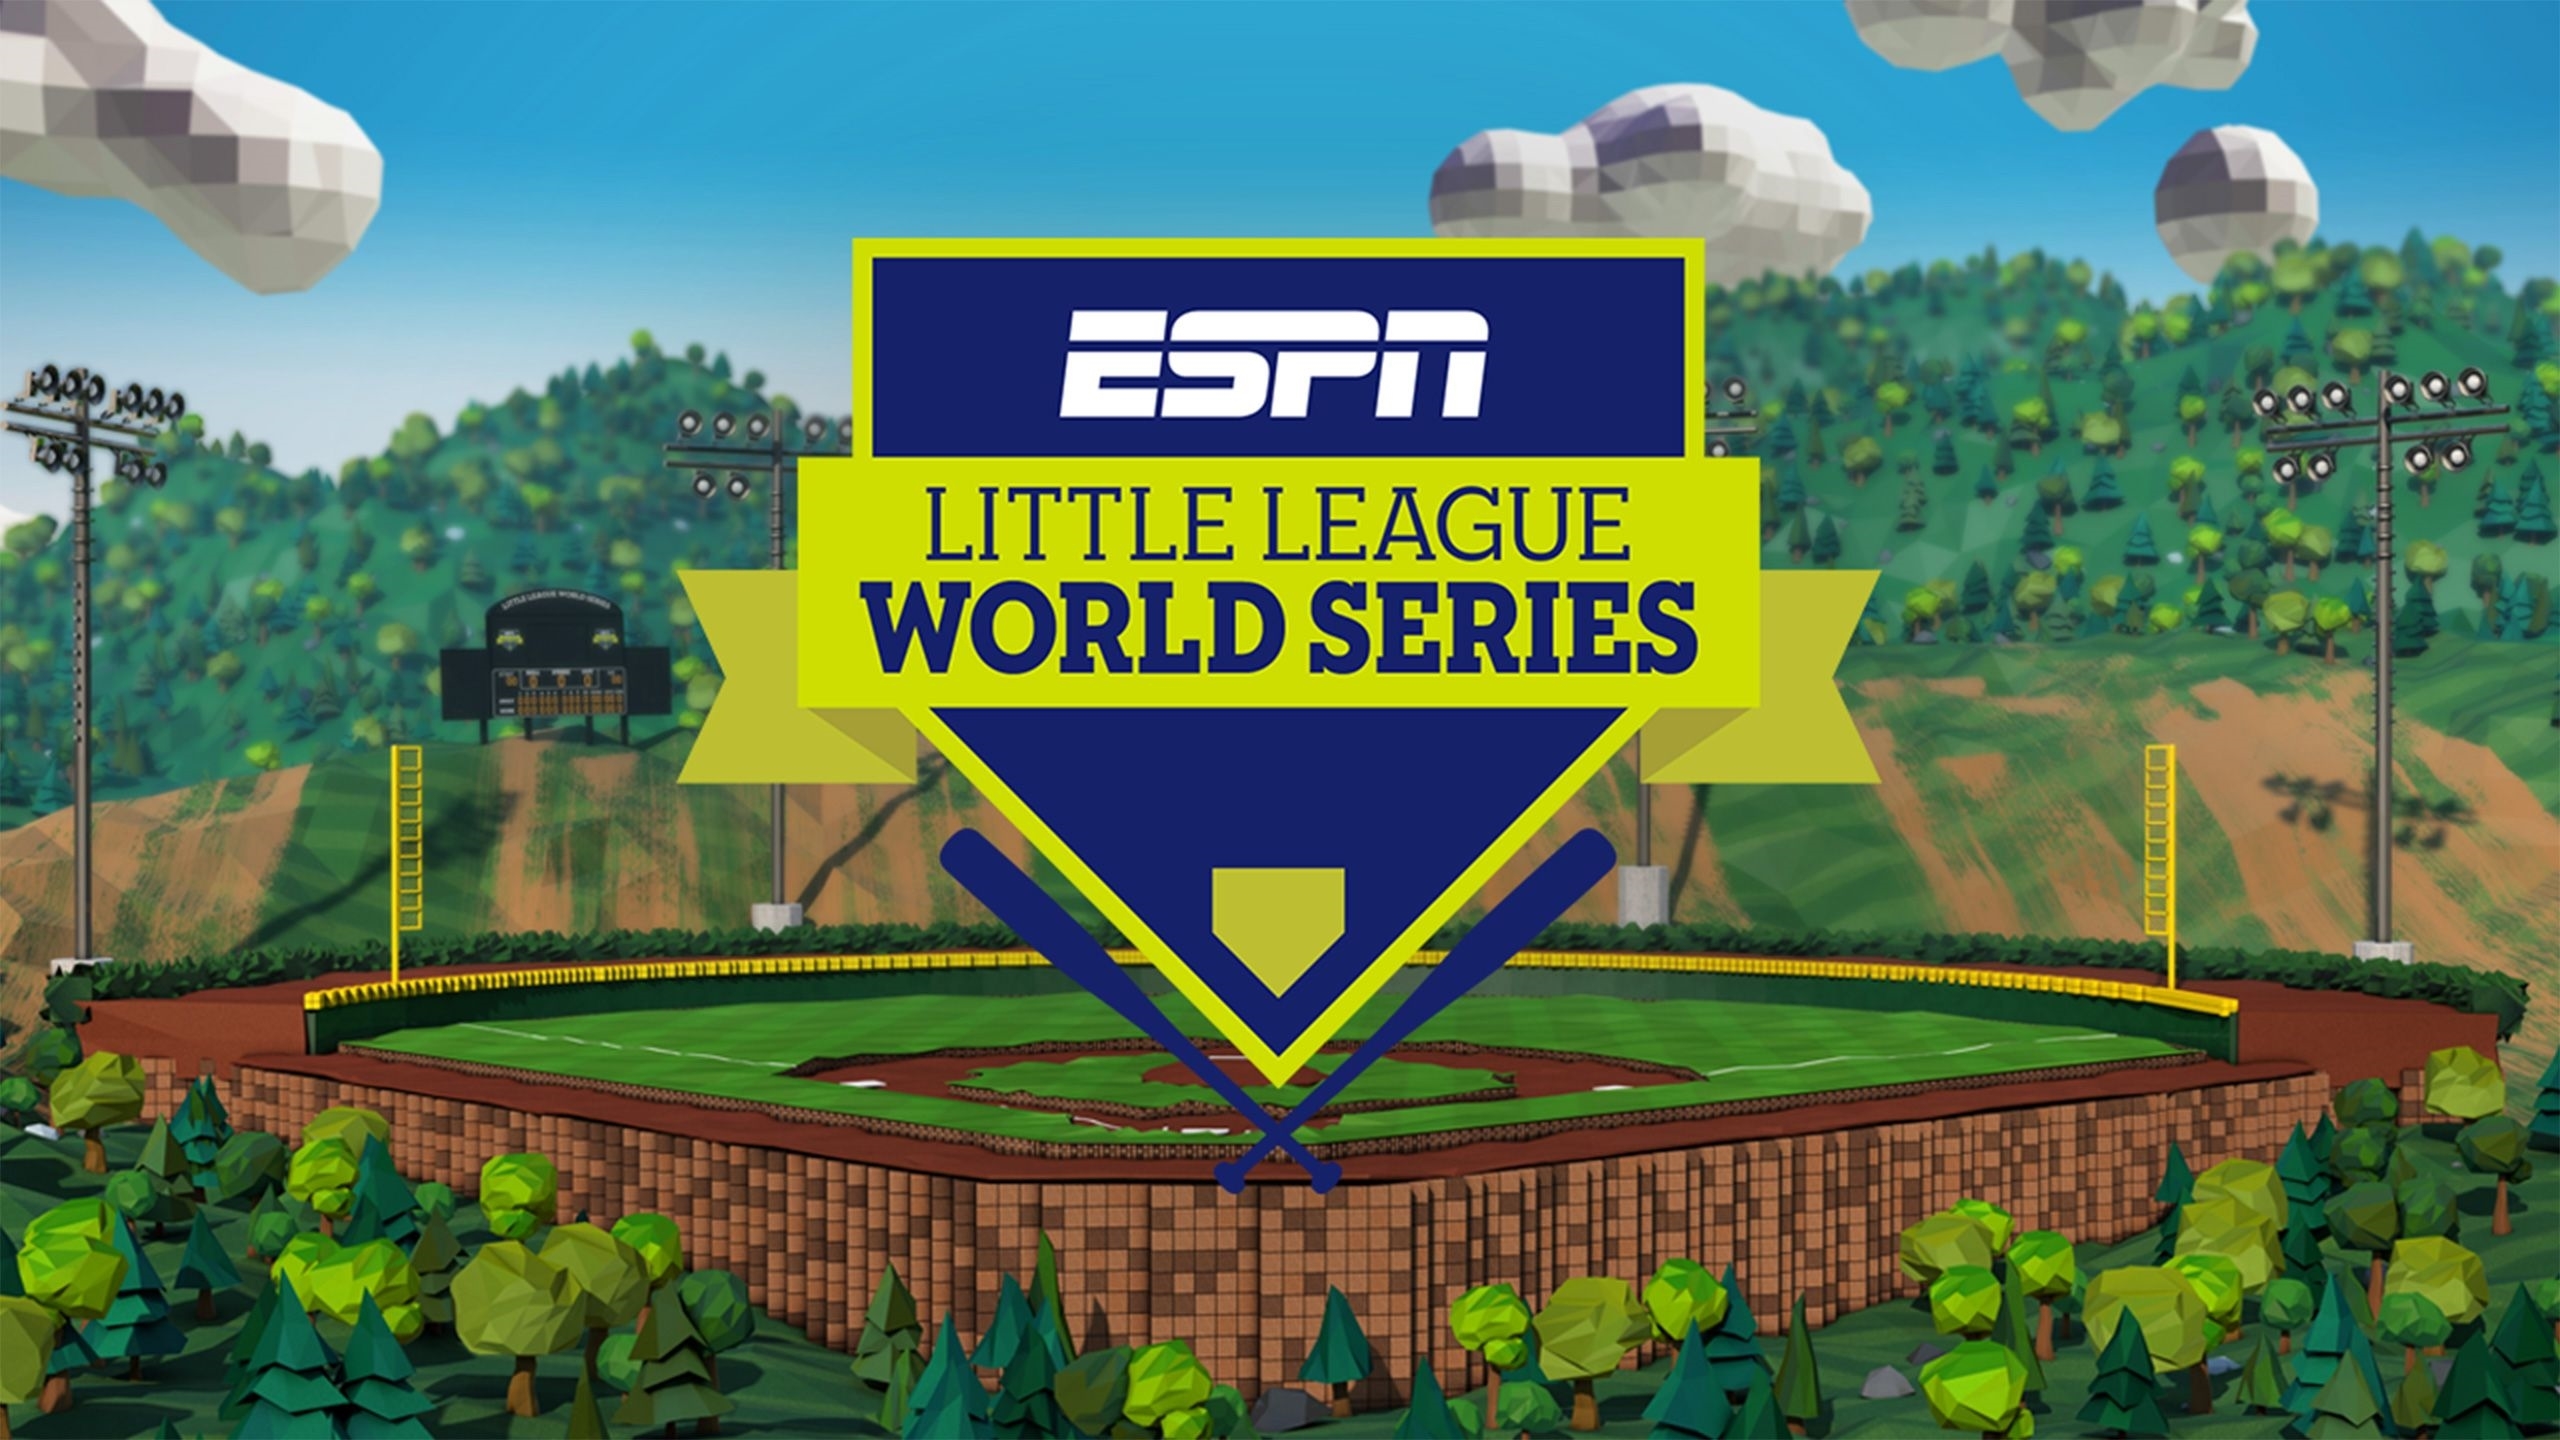 Things to Do During the Little League World Series Experience